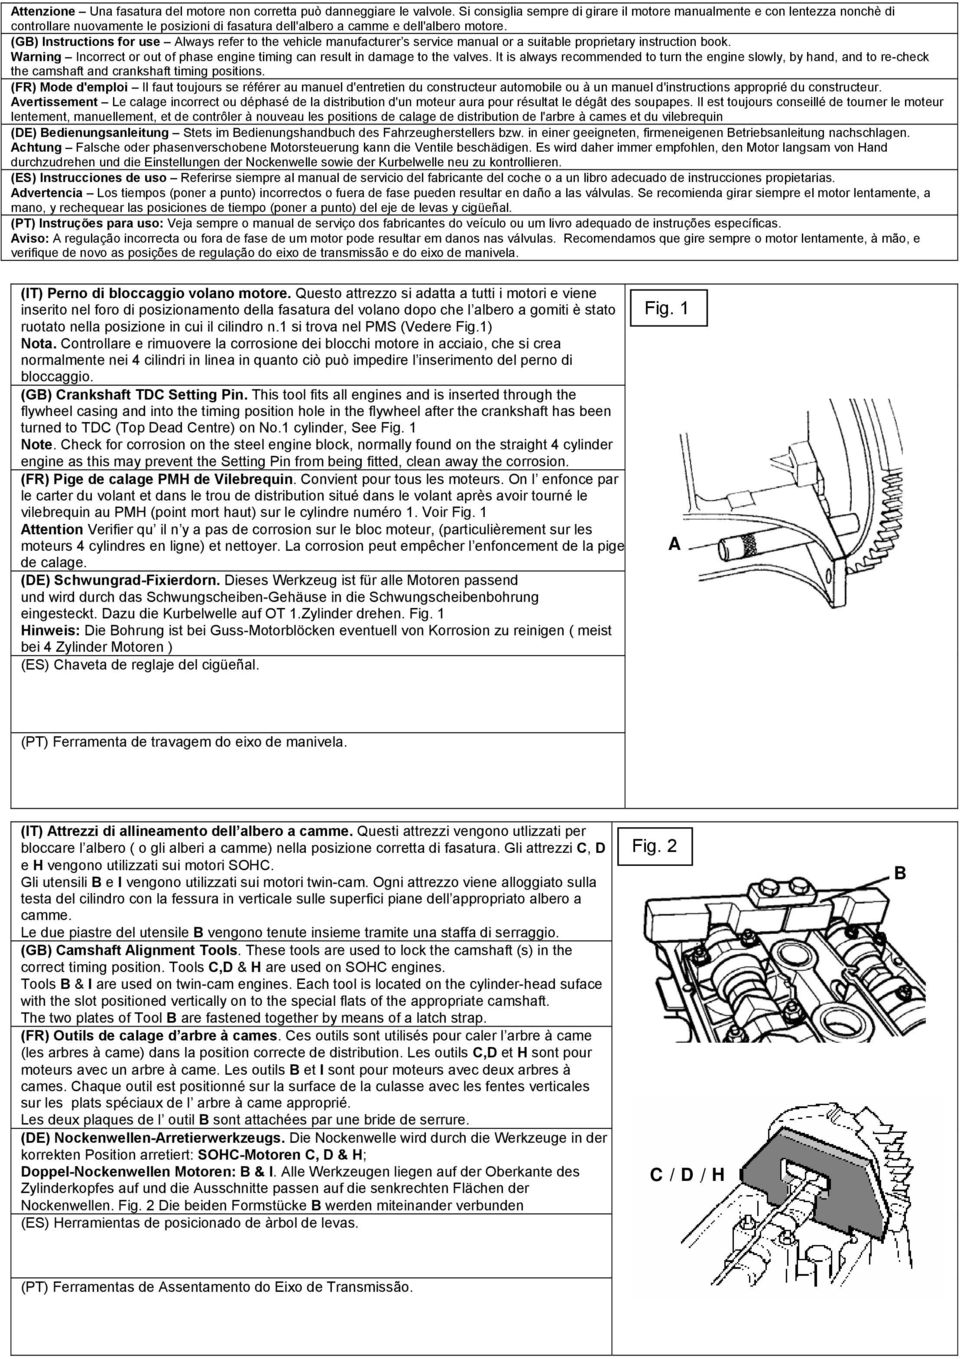 (GB) Instructions for use Always refer to the vehicle manufacturer s service manual or a suitable proprietary instruction book.